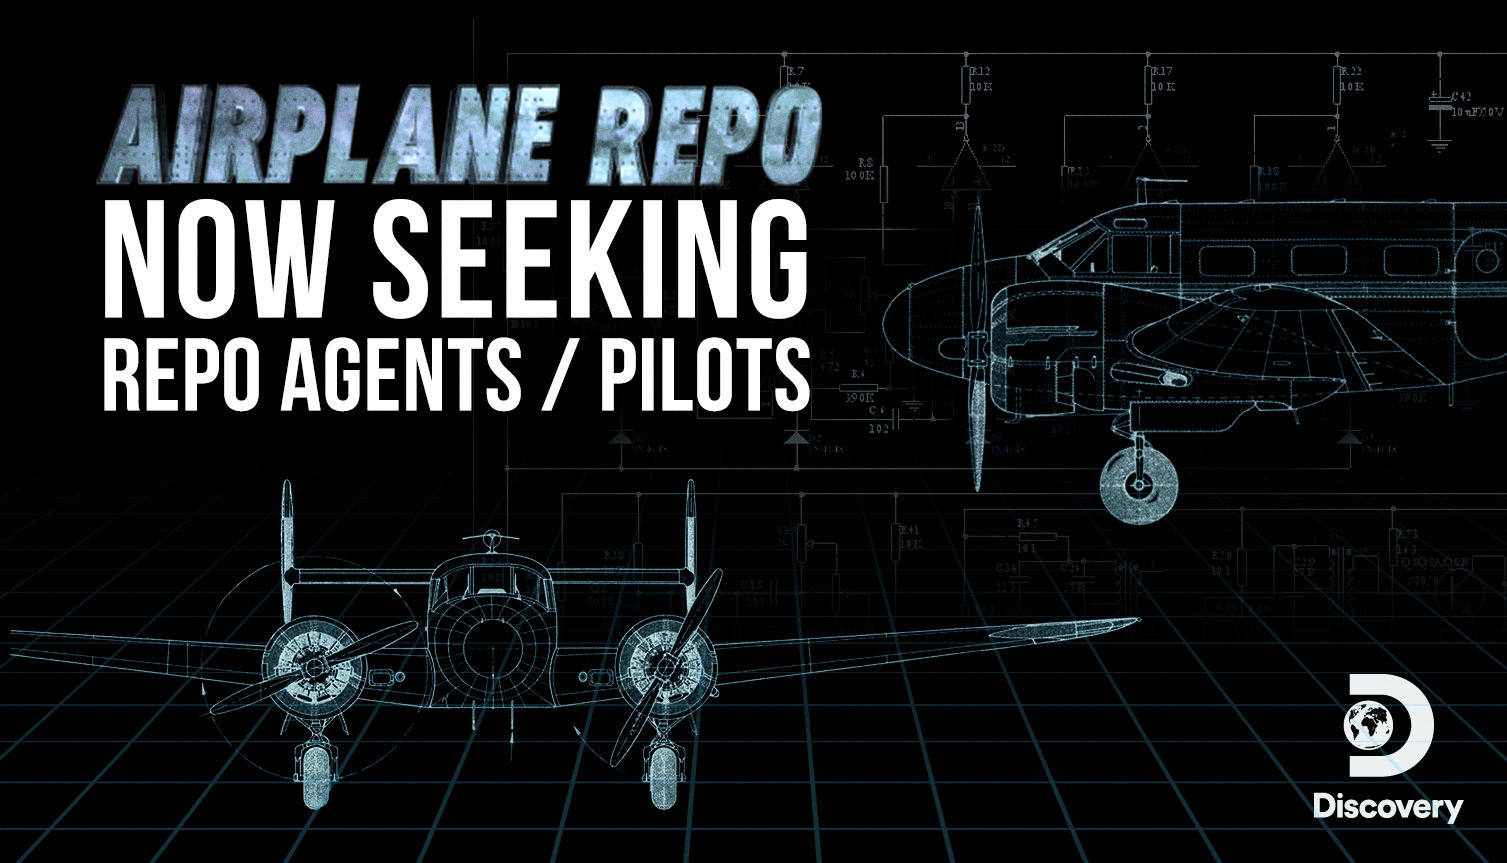 Now Seeking Aircraft Repo Agents/Pilots For Discovery Channel’s “Airplane Repo”